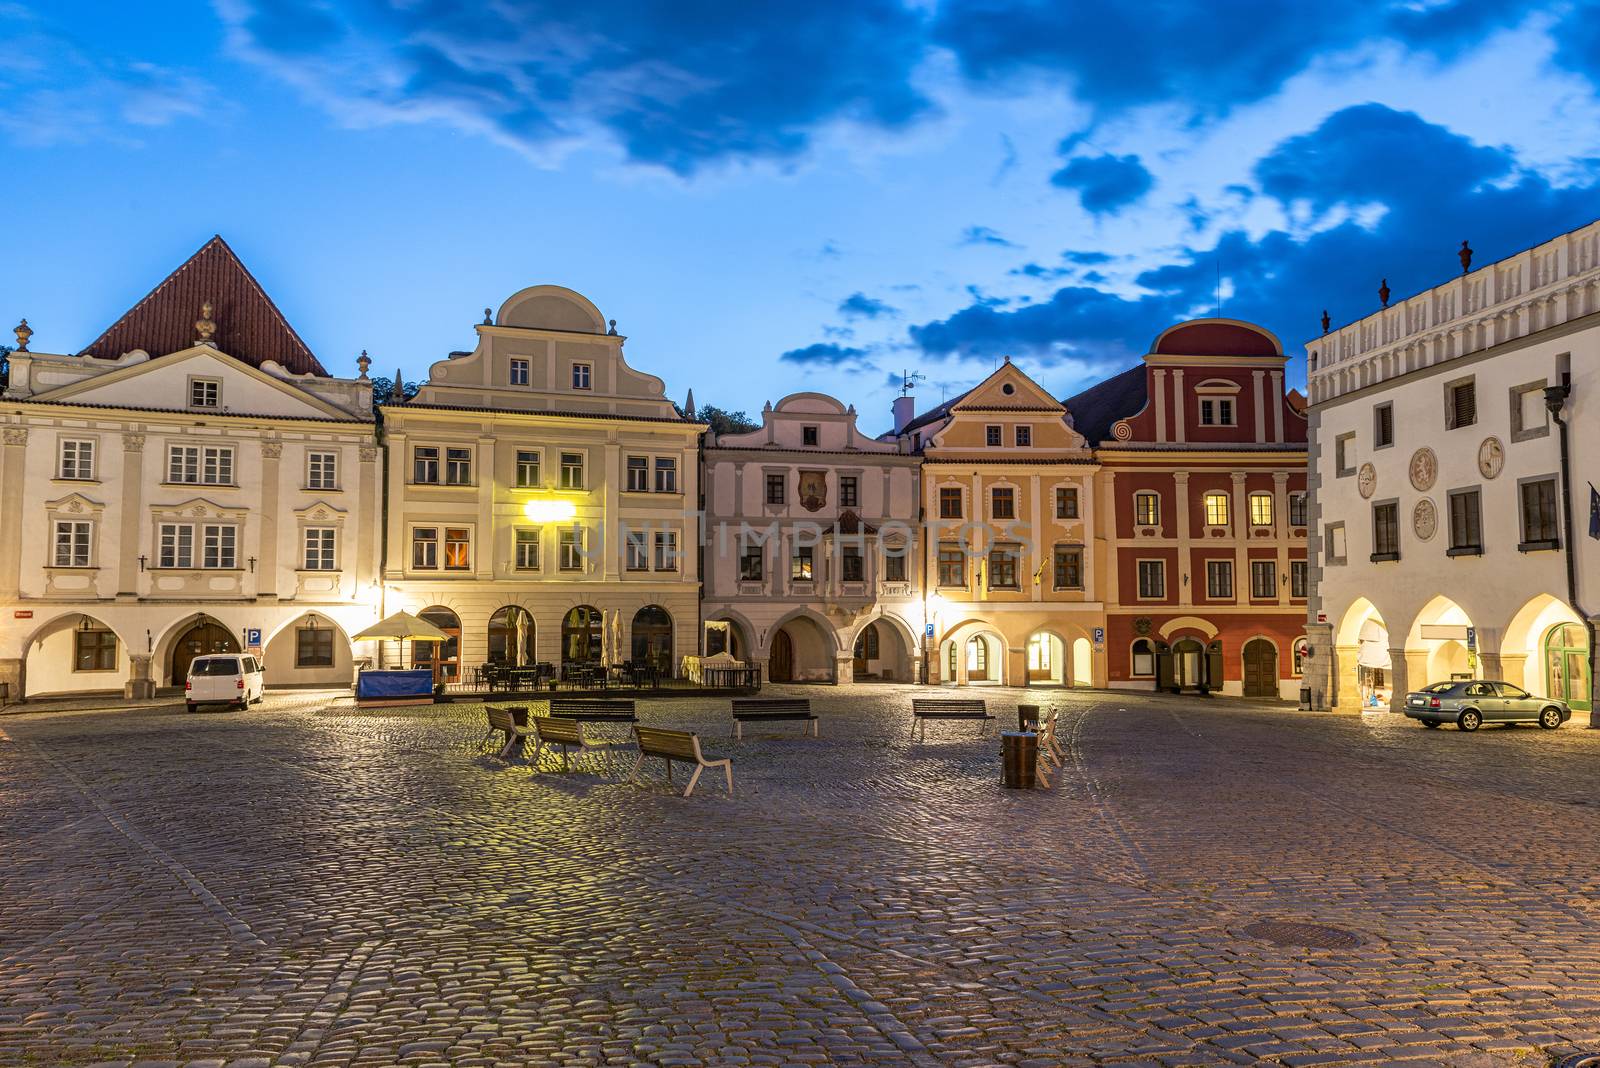 Photo of completly empty town square Svornosti (Namesti svornosti) in Cesky Krumlov early in the evening. This place is usually full of tourists from all around the world but covid-19 quarantine emptied this town totally. Czech Republic